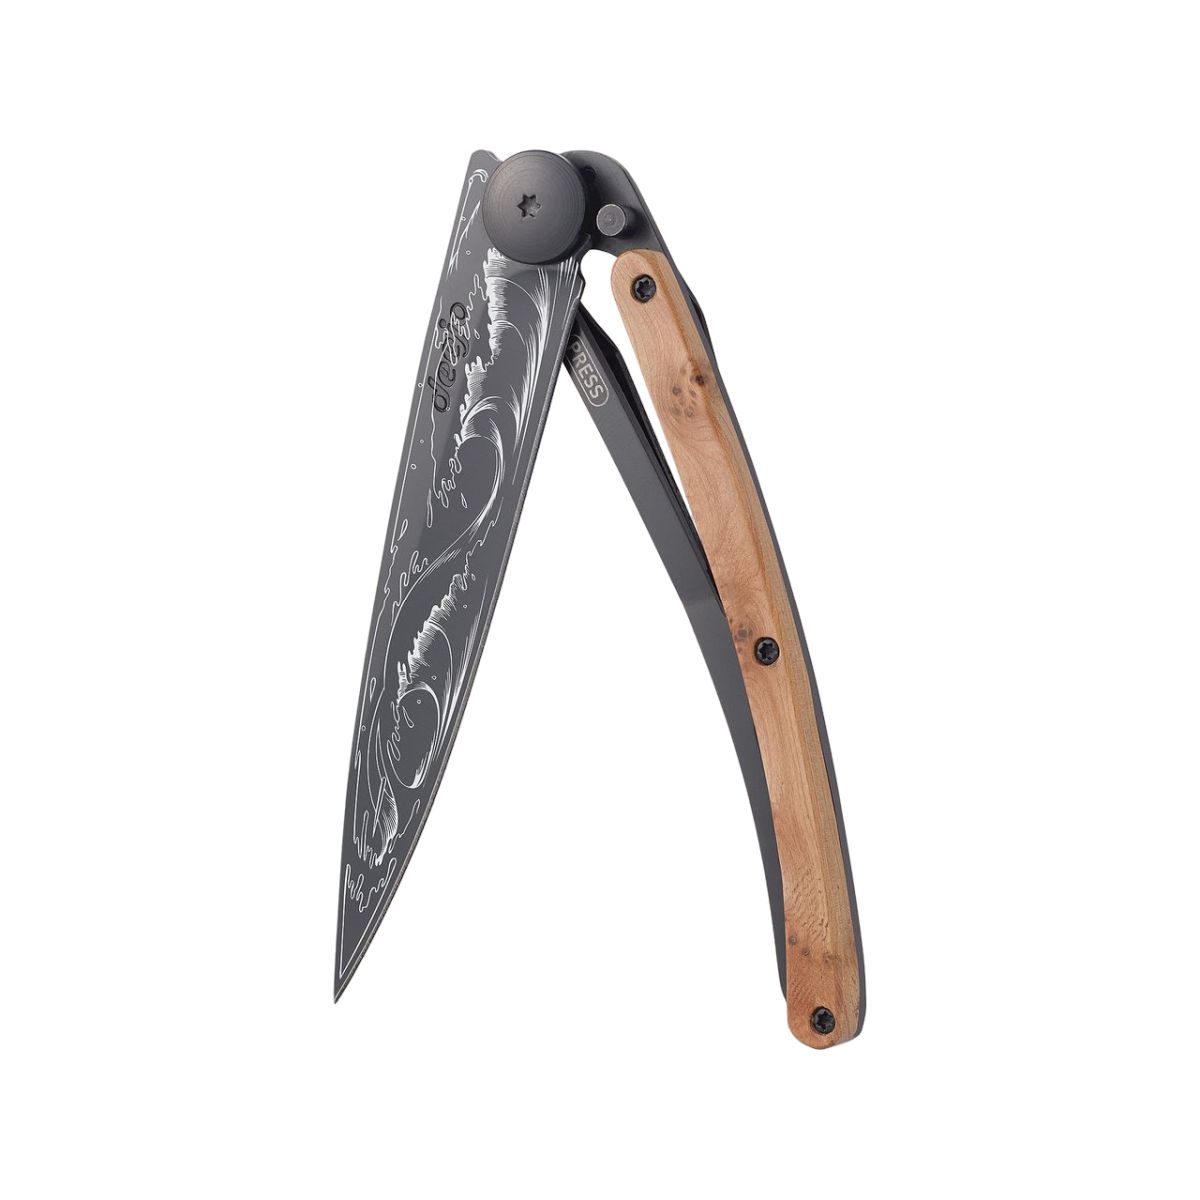 Serrated 37g Brown Camo, Tattoo Fly Fishing, Pocket Knife